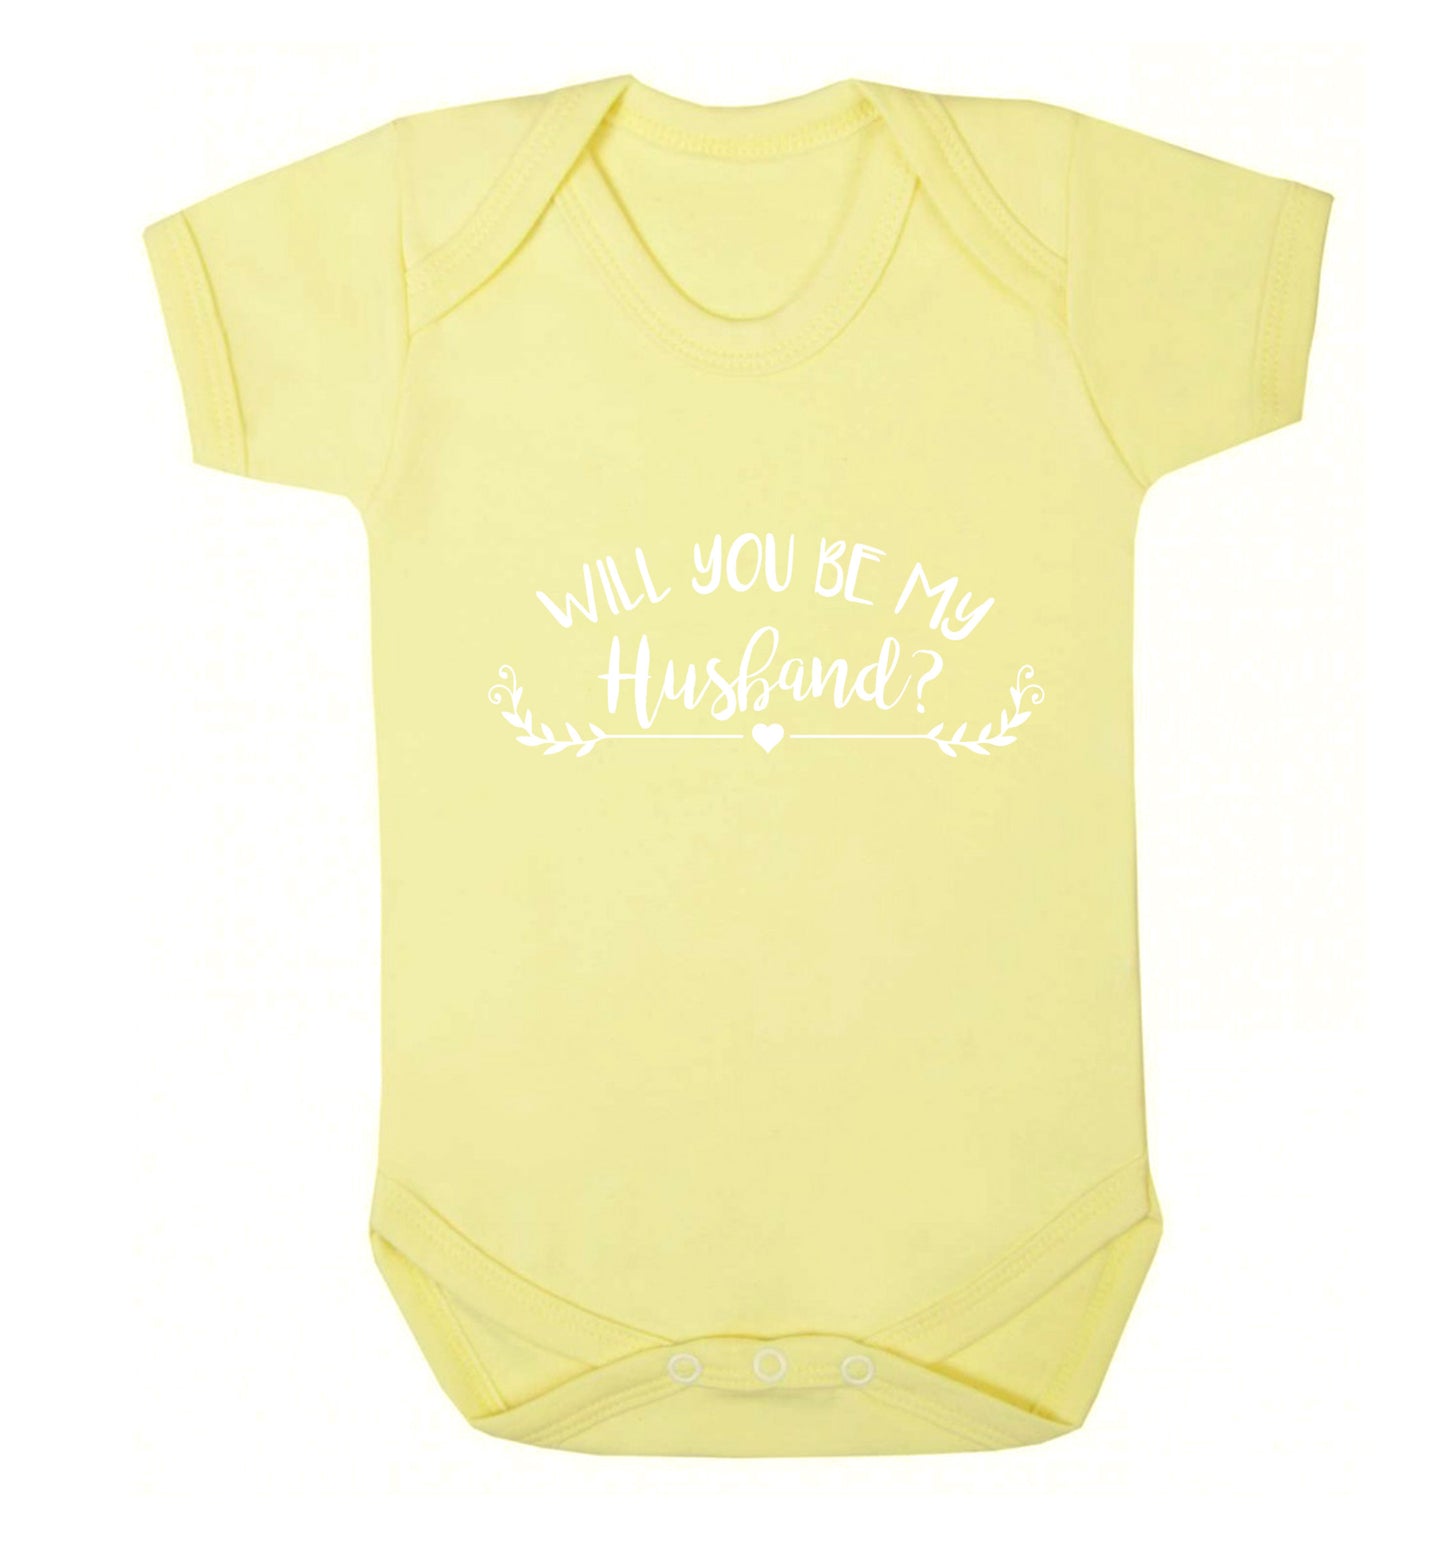 Will you be my husband? Baby Vest pale yellow 18-24 months